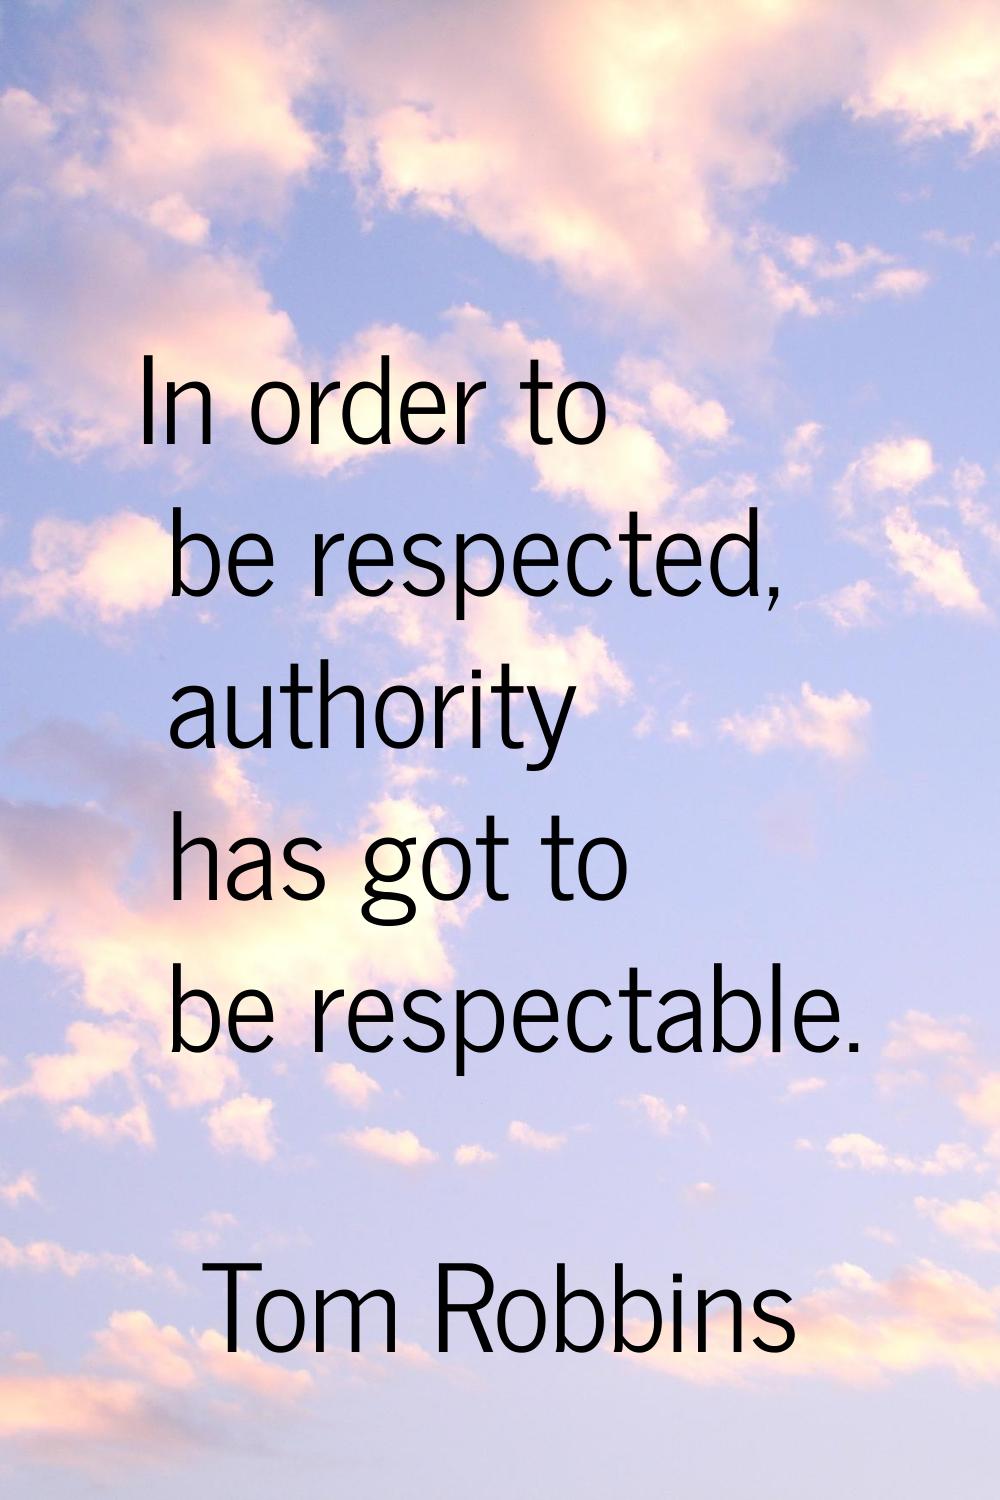 In order to be respected, authority has got to be respectable.